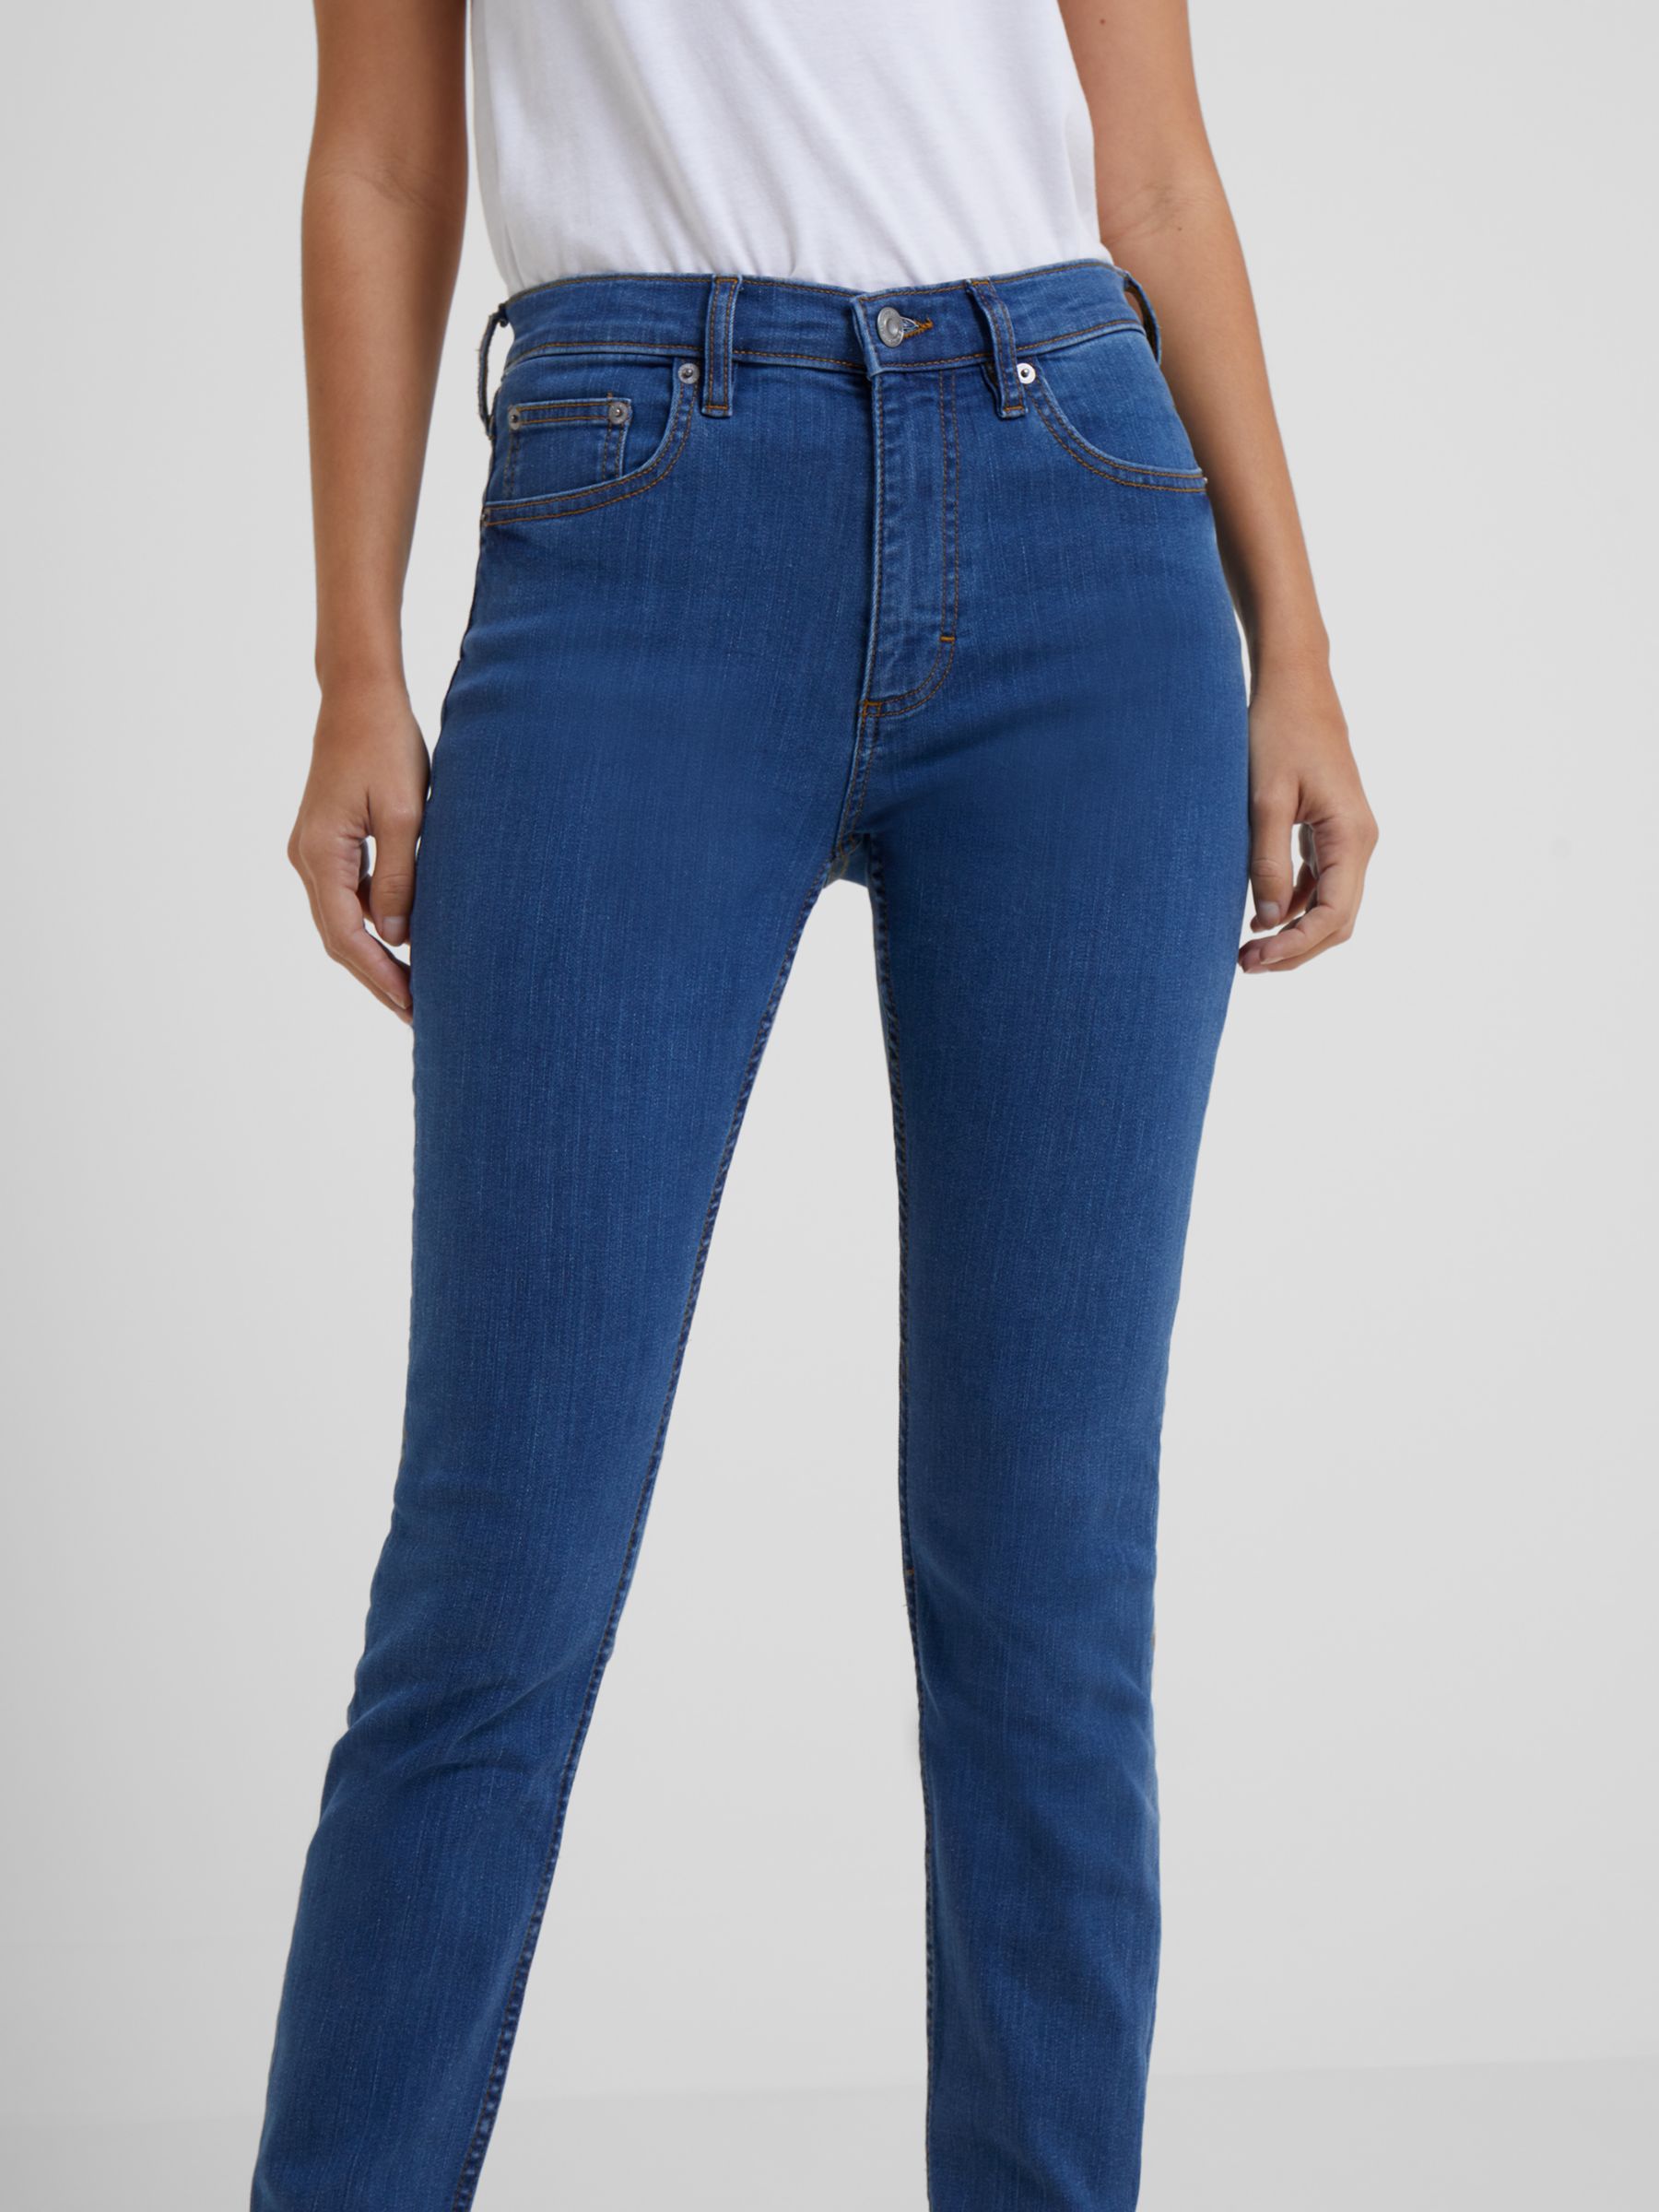 French Connection Rebound Response Jeans, Mid Wash, 8